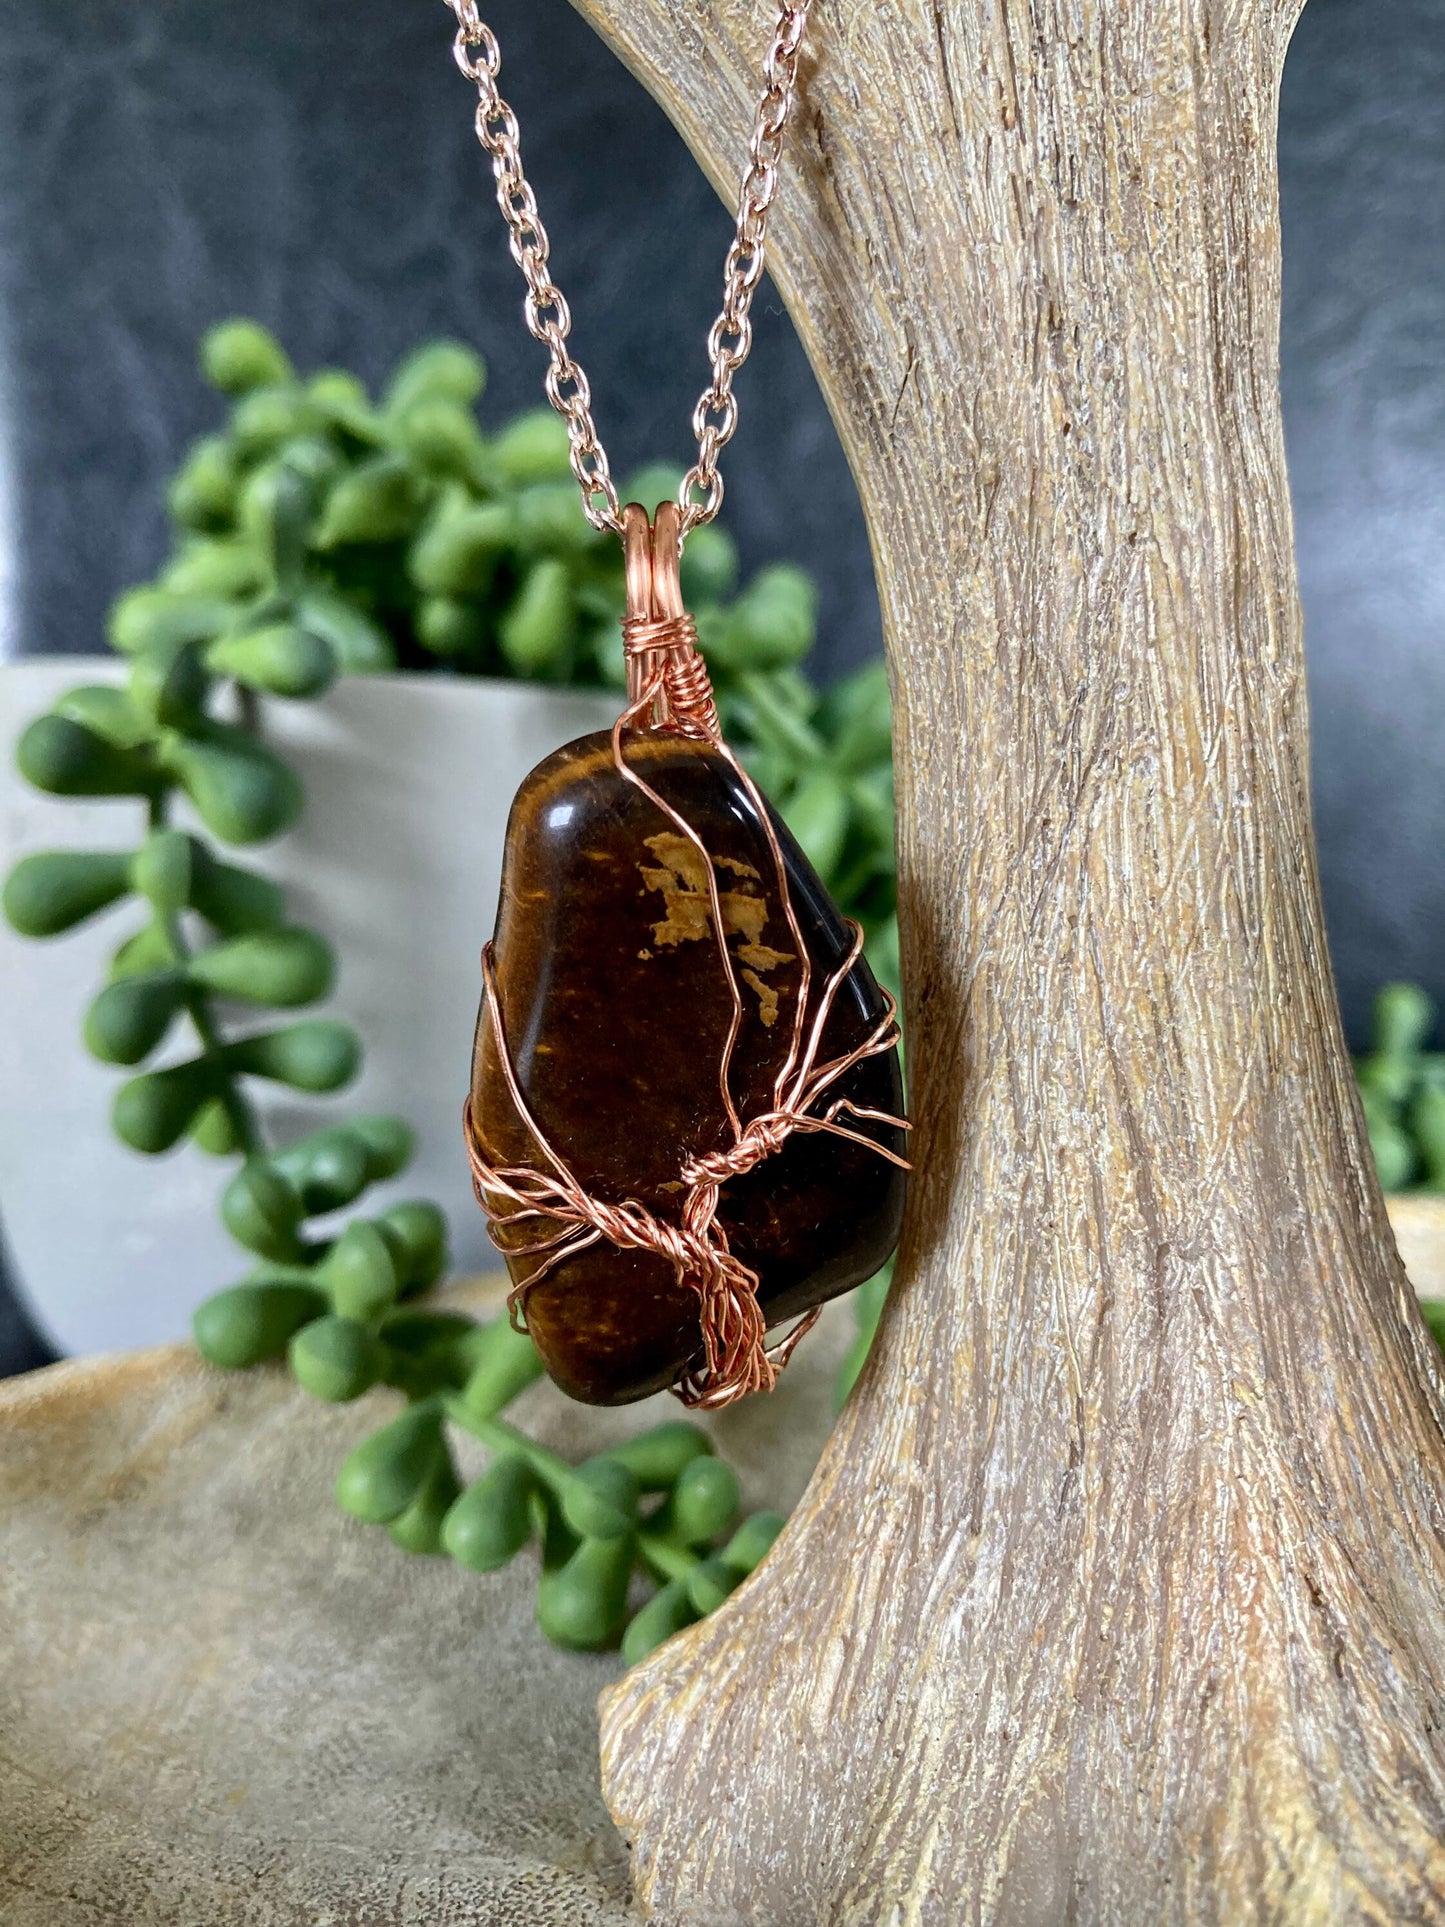 Tiger eye pendant handmade necklace wire wrapped natural stone with 18 inch length chain